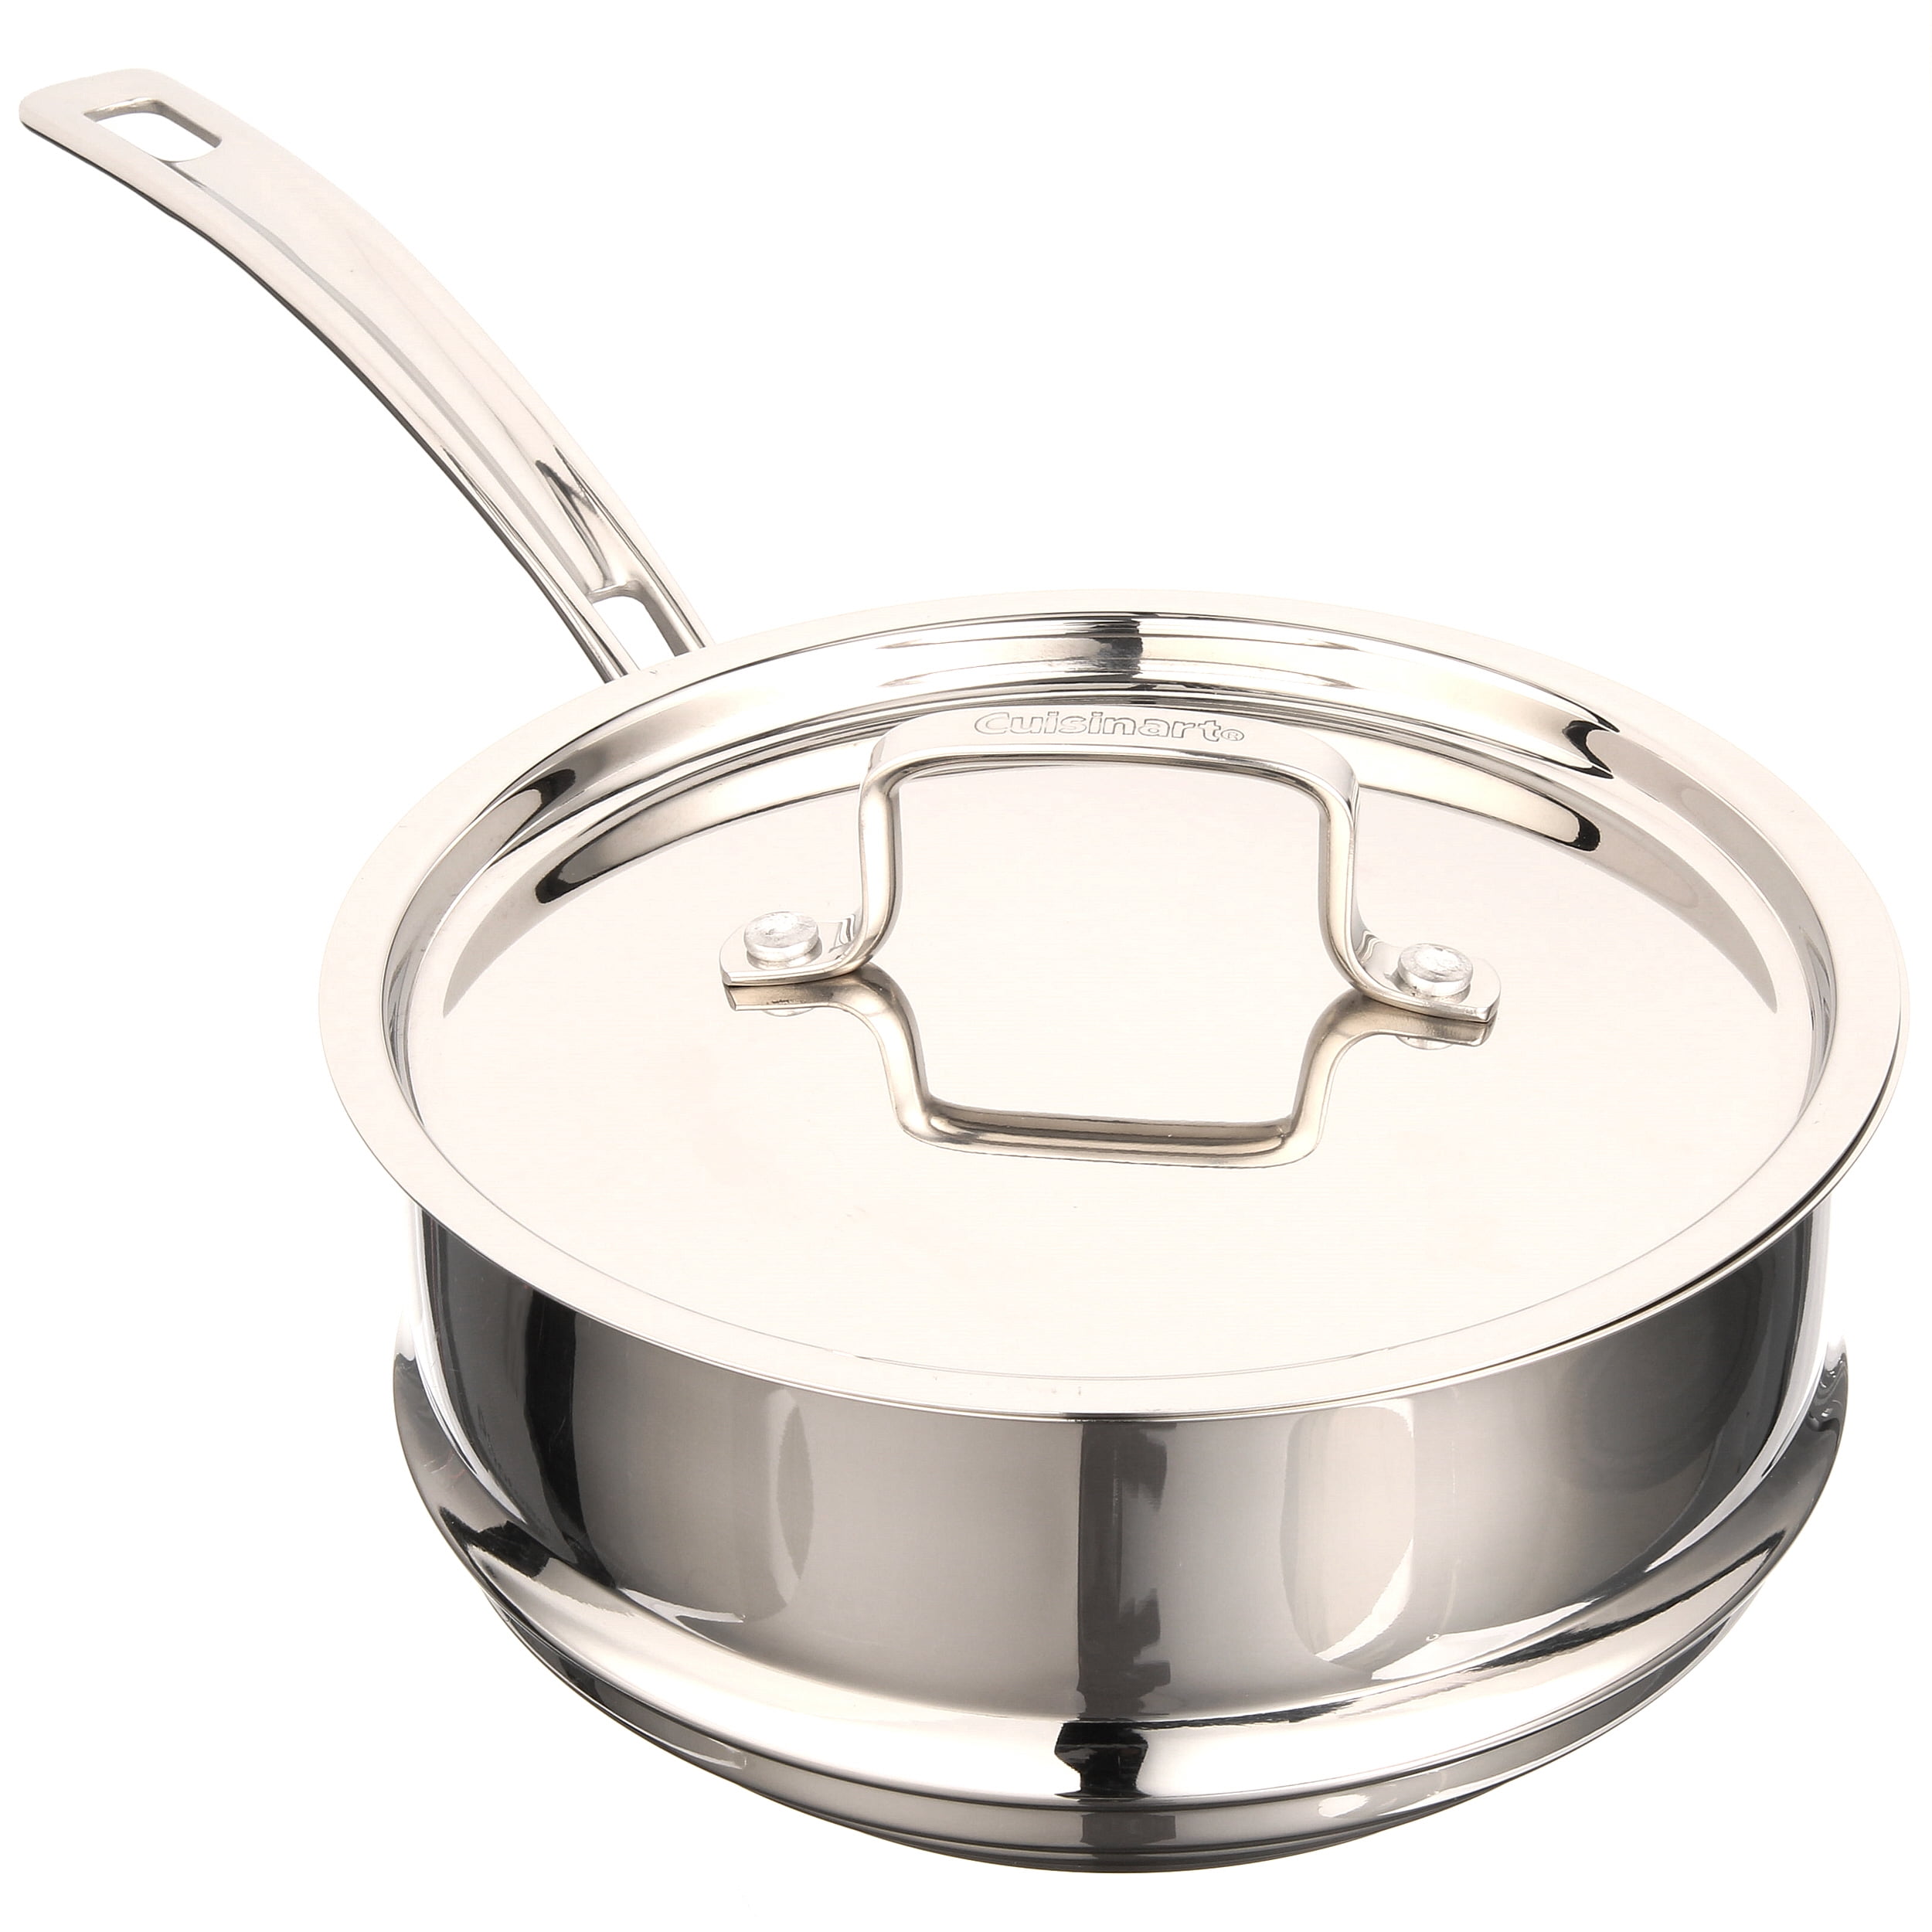 Cuisinart Classic Mutliclad Pro 8qt Stainless Steel Tri-ply